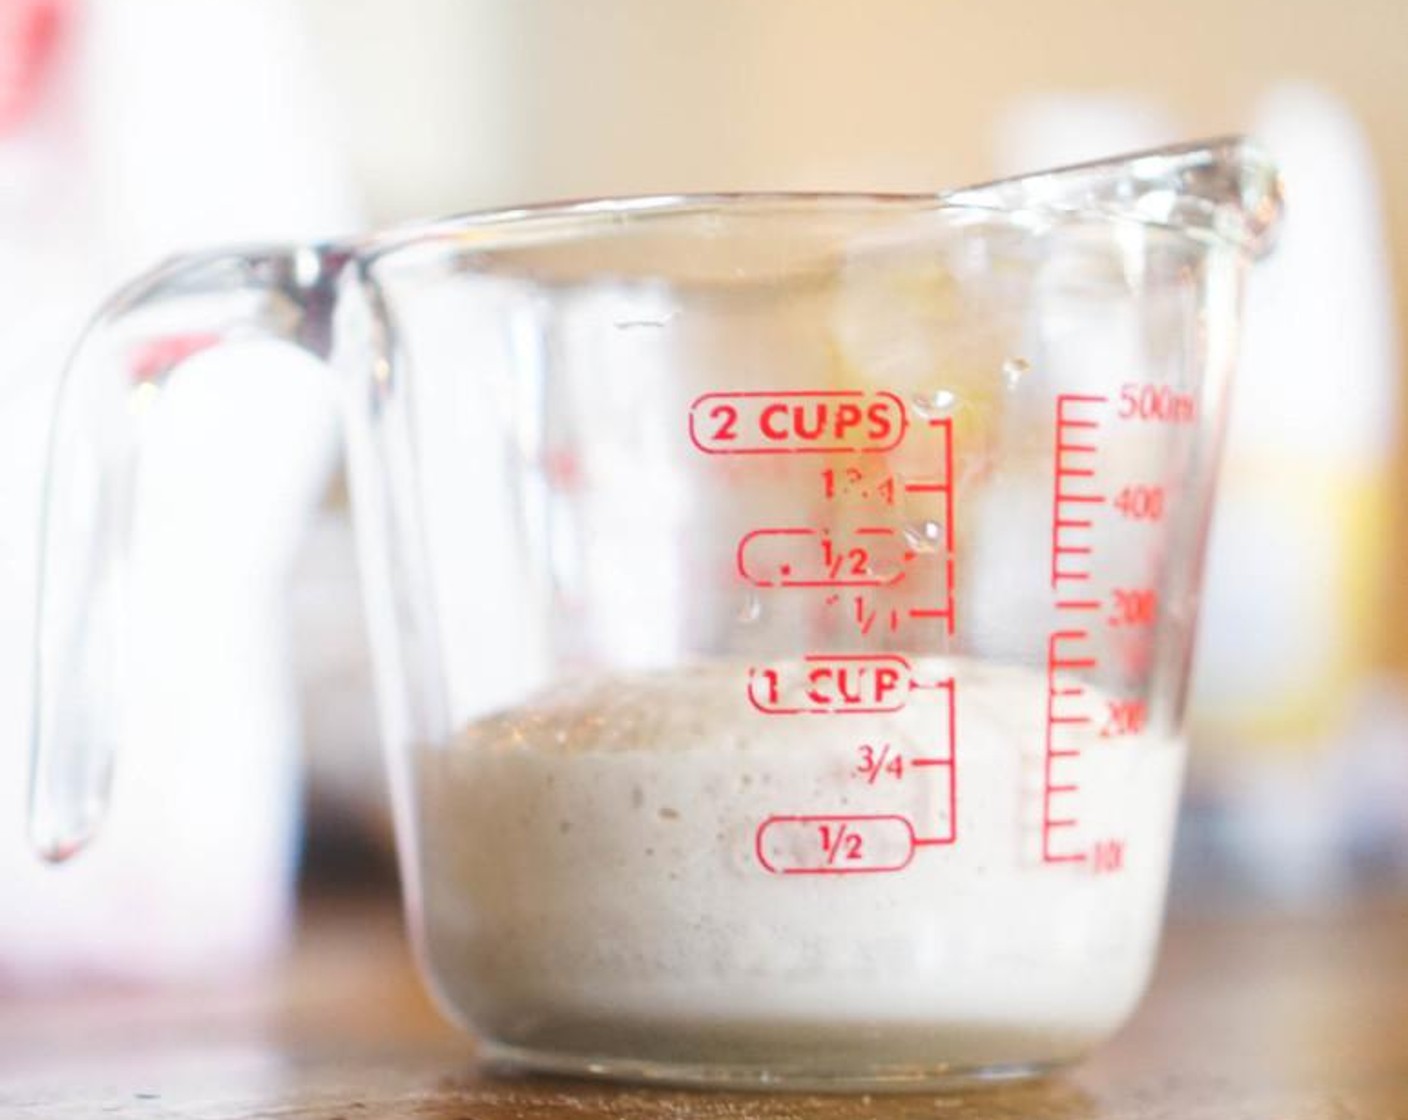 step 2 Place the Water (1/4 cup), Granulated Sugar (1 Tbsp), and Active Dry Yeast (1 pckg) in a 1 cup measuring cup. Stir for two seconds, then set aside for ten minutes. The yeast will foam, double in size, and should reach the 3/4-cup line.